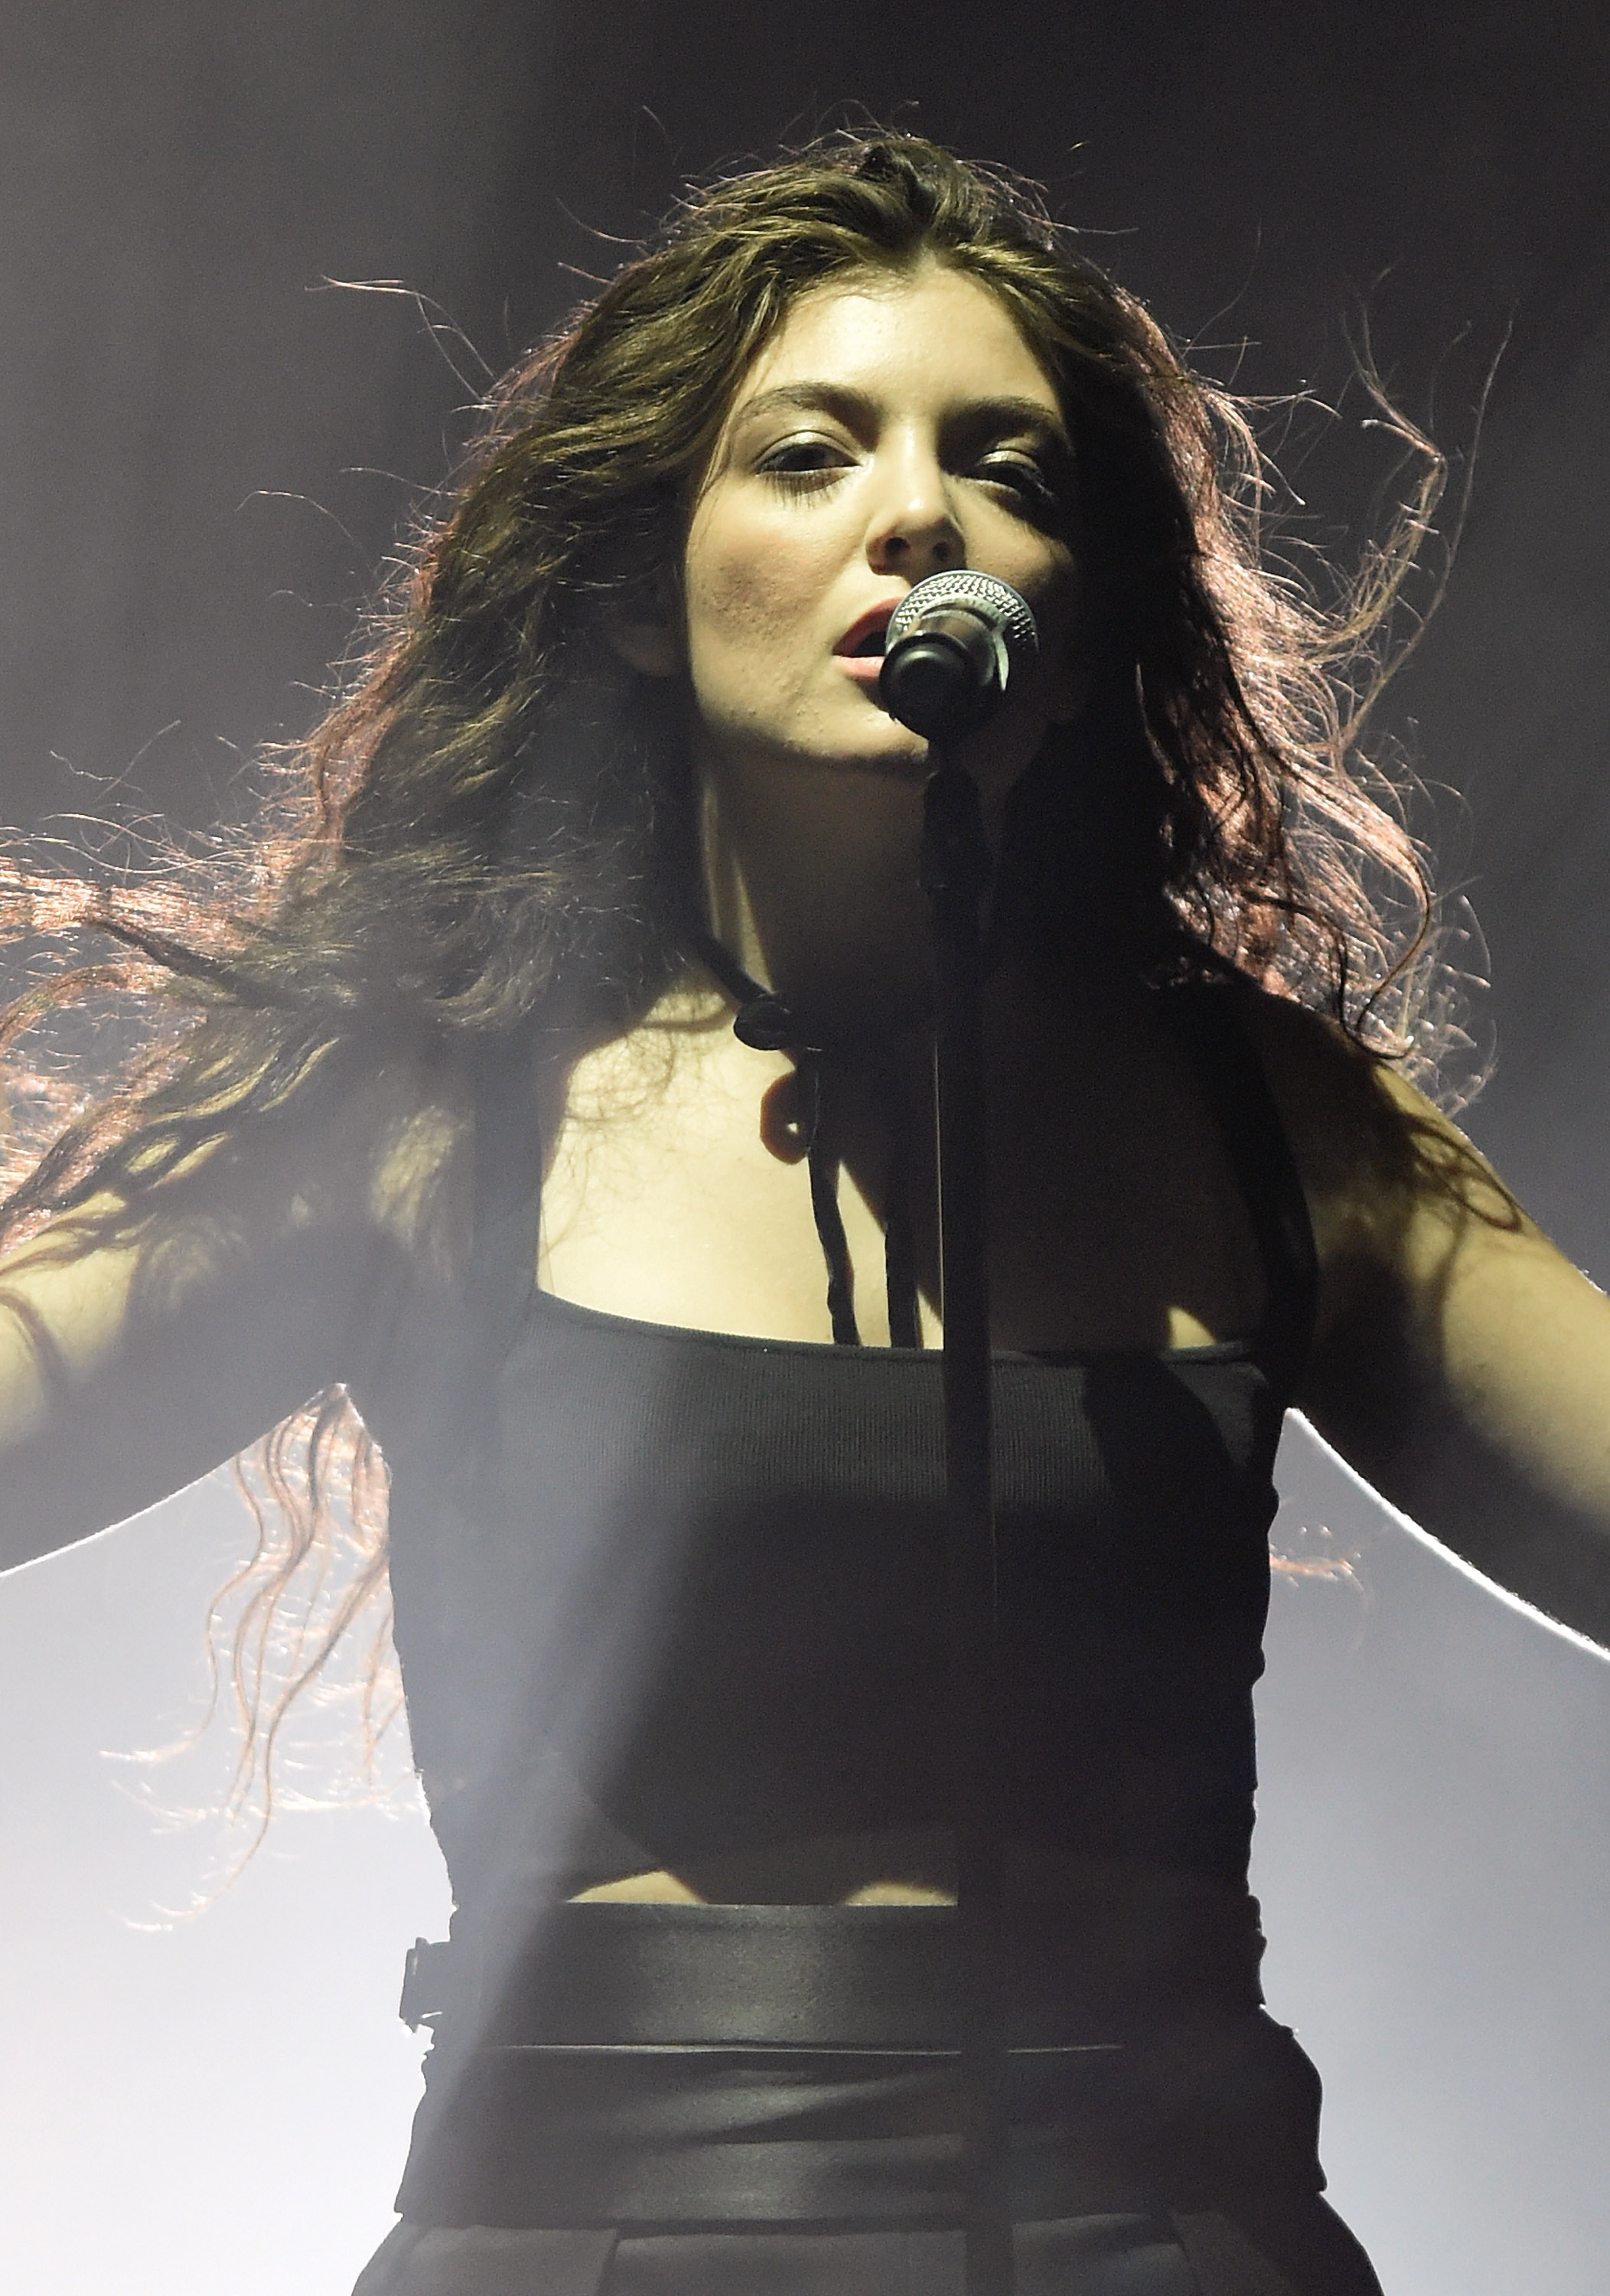 Lorde's 'Royals' song banned in San Francisco